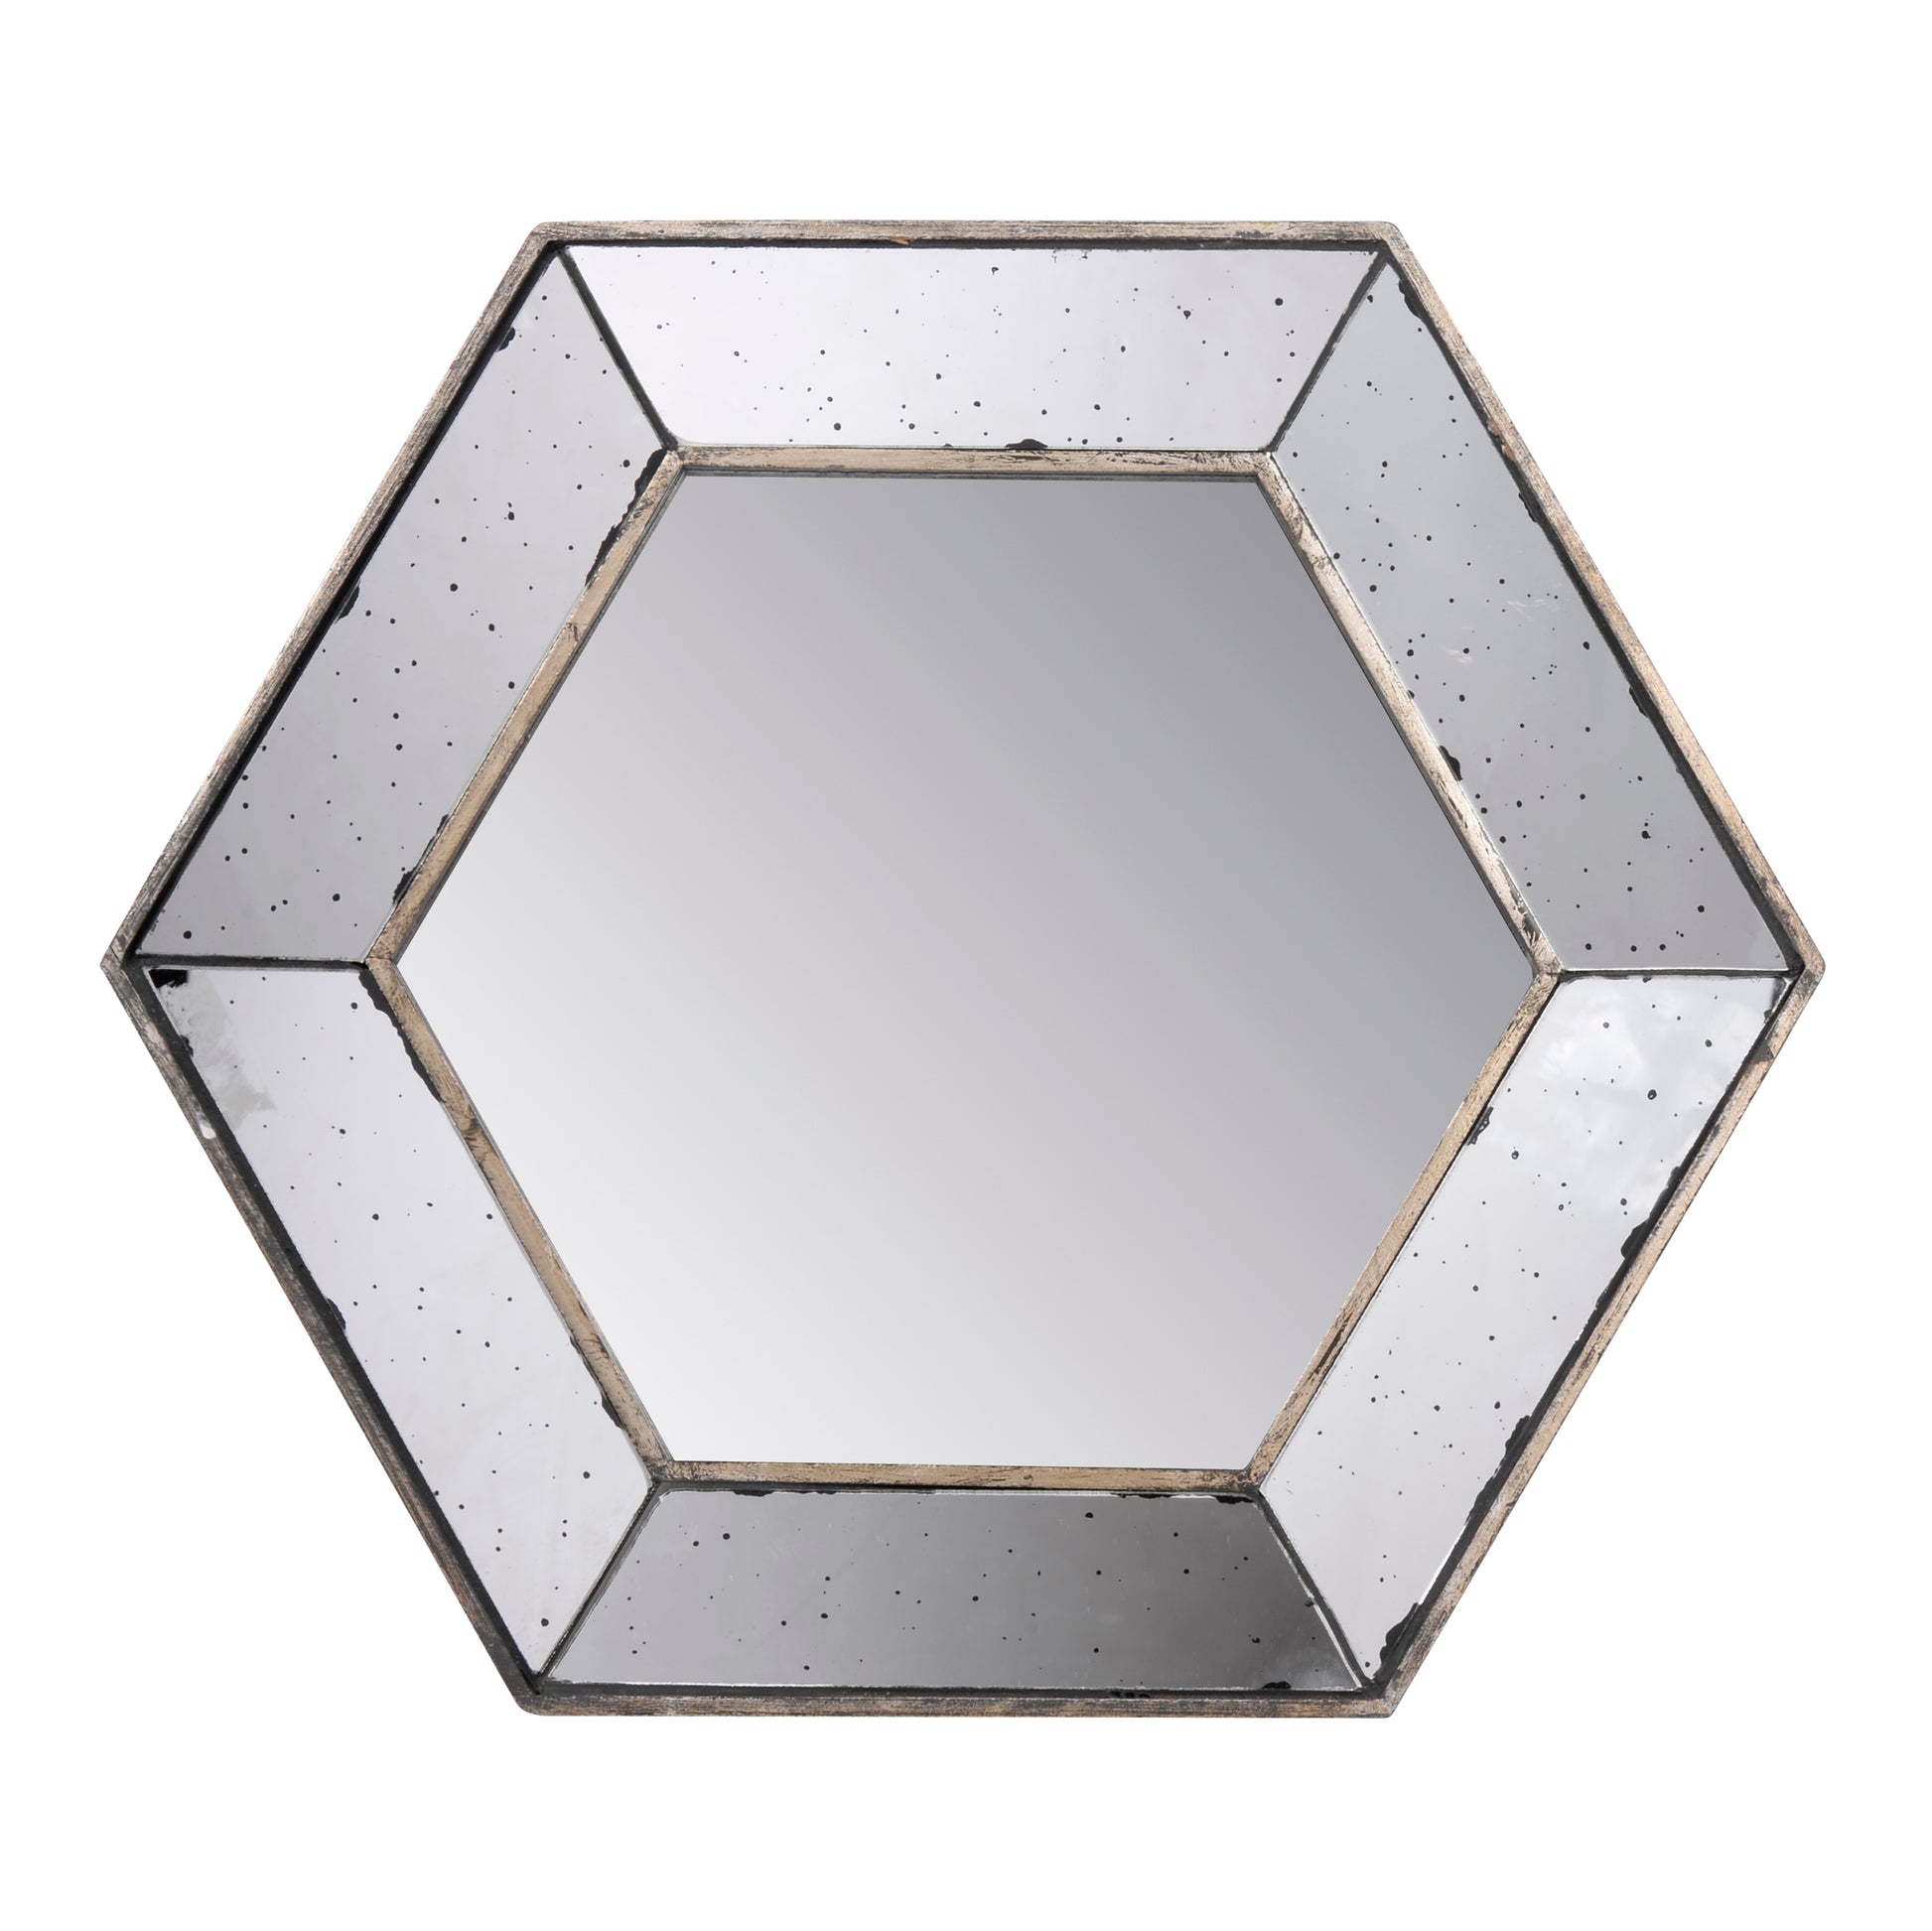 21" x 18" Hexagon Wall Mirror with Traditional Silver silver-mdf+glass